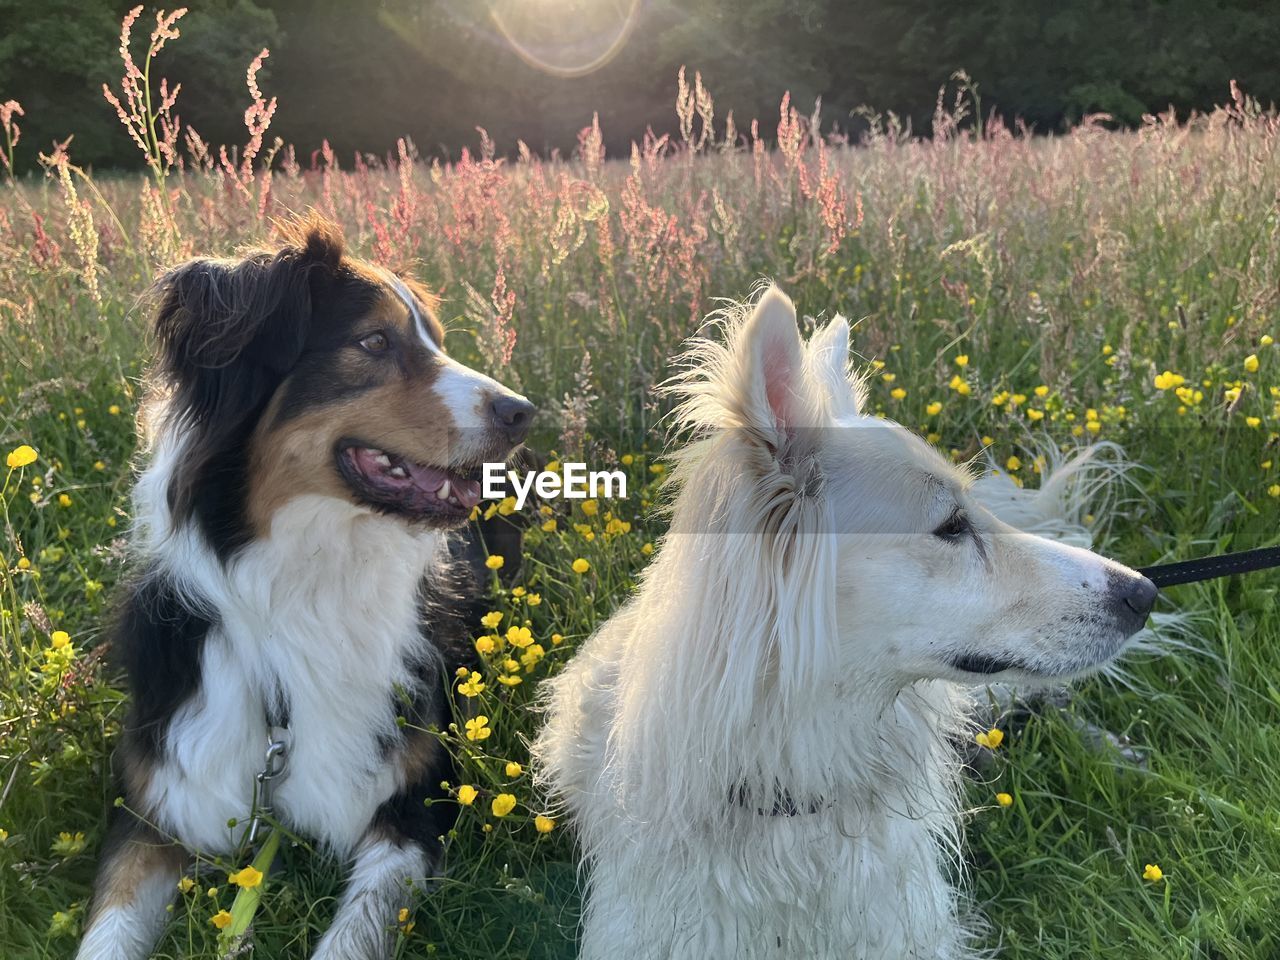 canine, dog, pet, mammal, domestic animals, animal themes, animal, one animal, plant, grass, nature, field, flowering plant, flower, no people, border collie, sunlight, animal body part, outdoors, sky, looking, land, summer, environment, plain, looking away, meadow, day, sunset